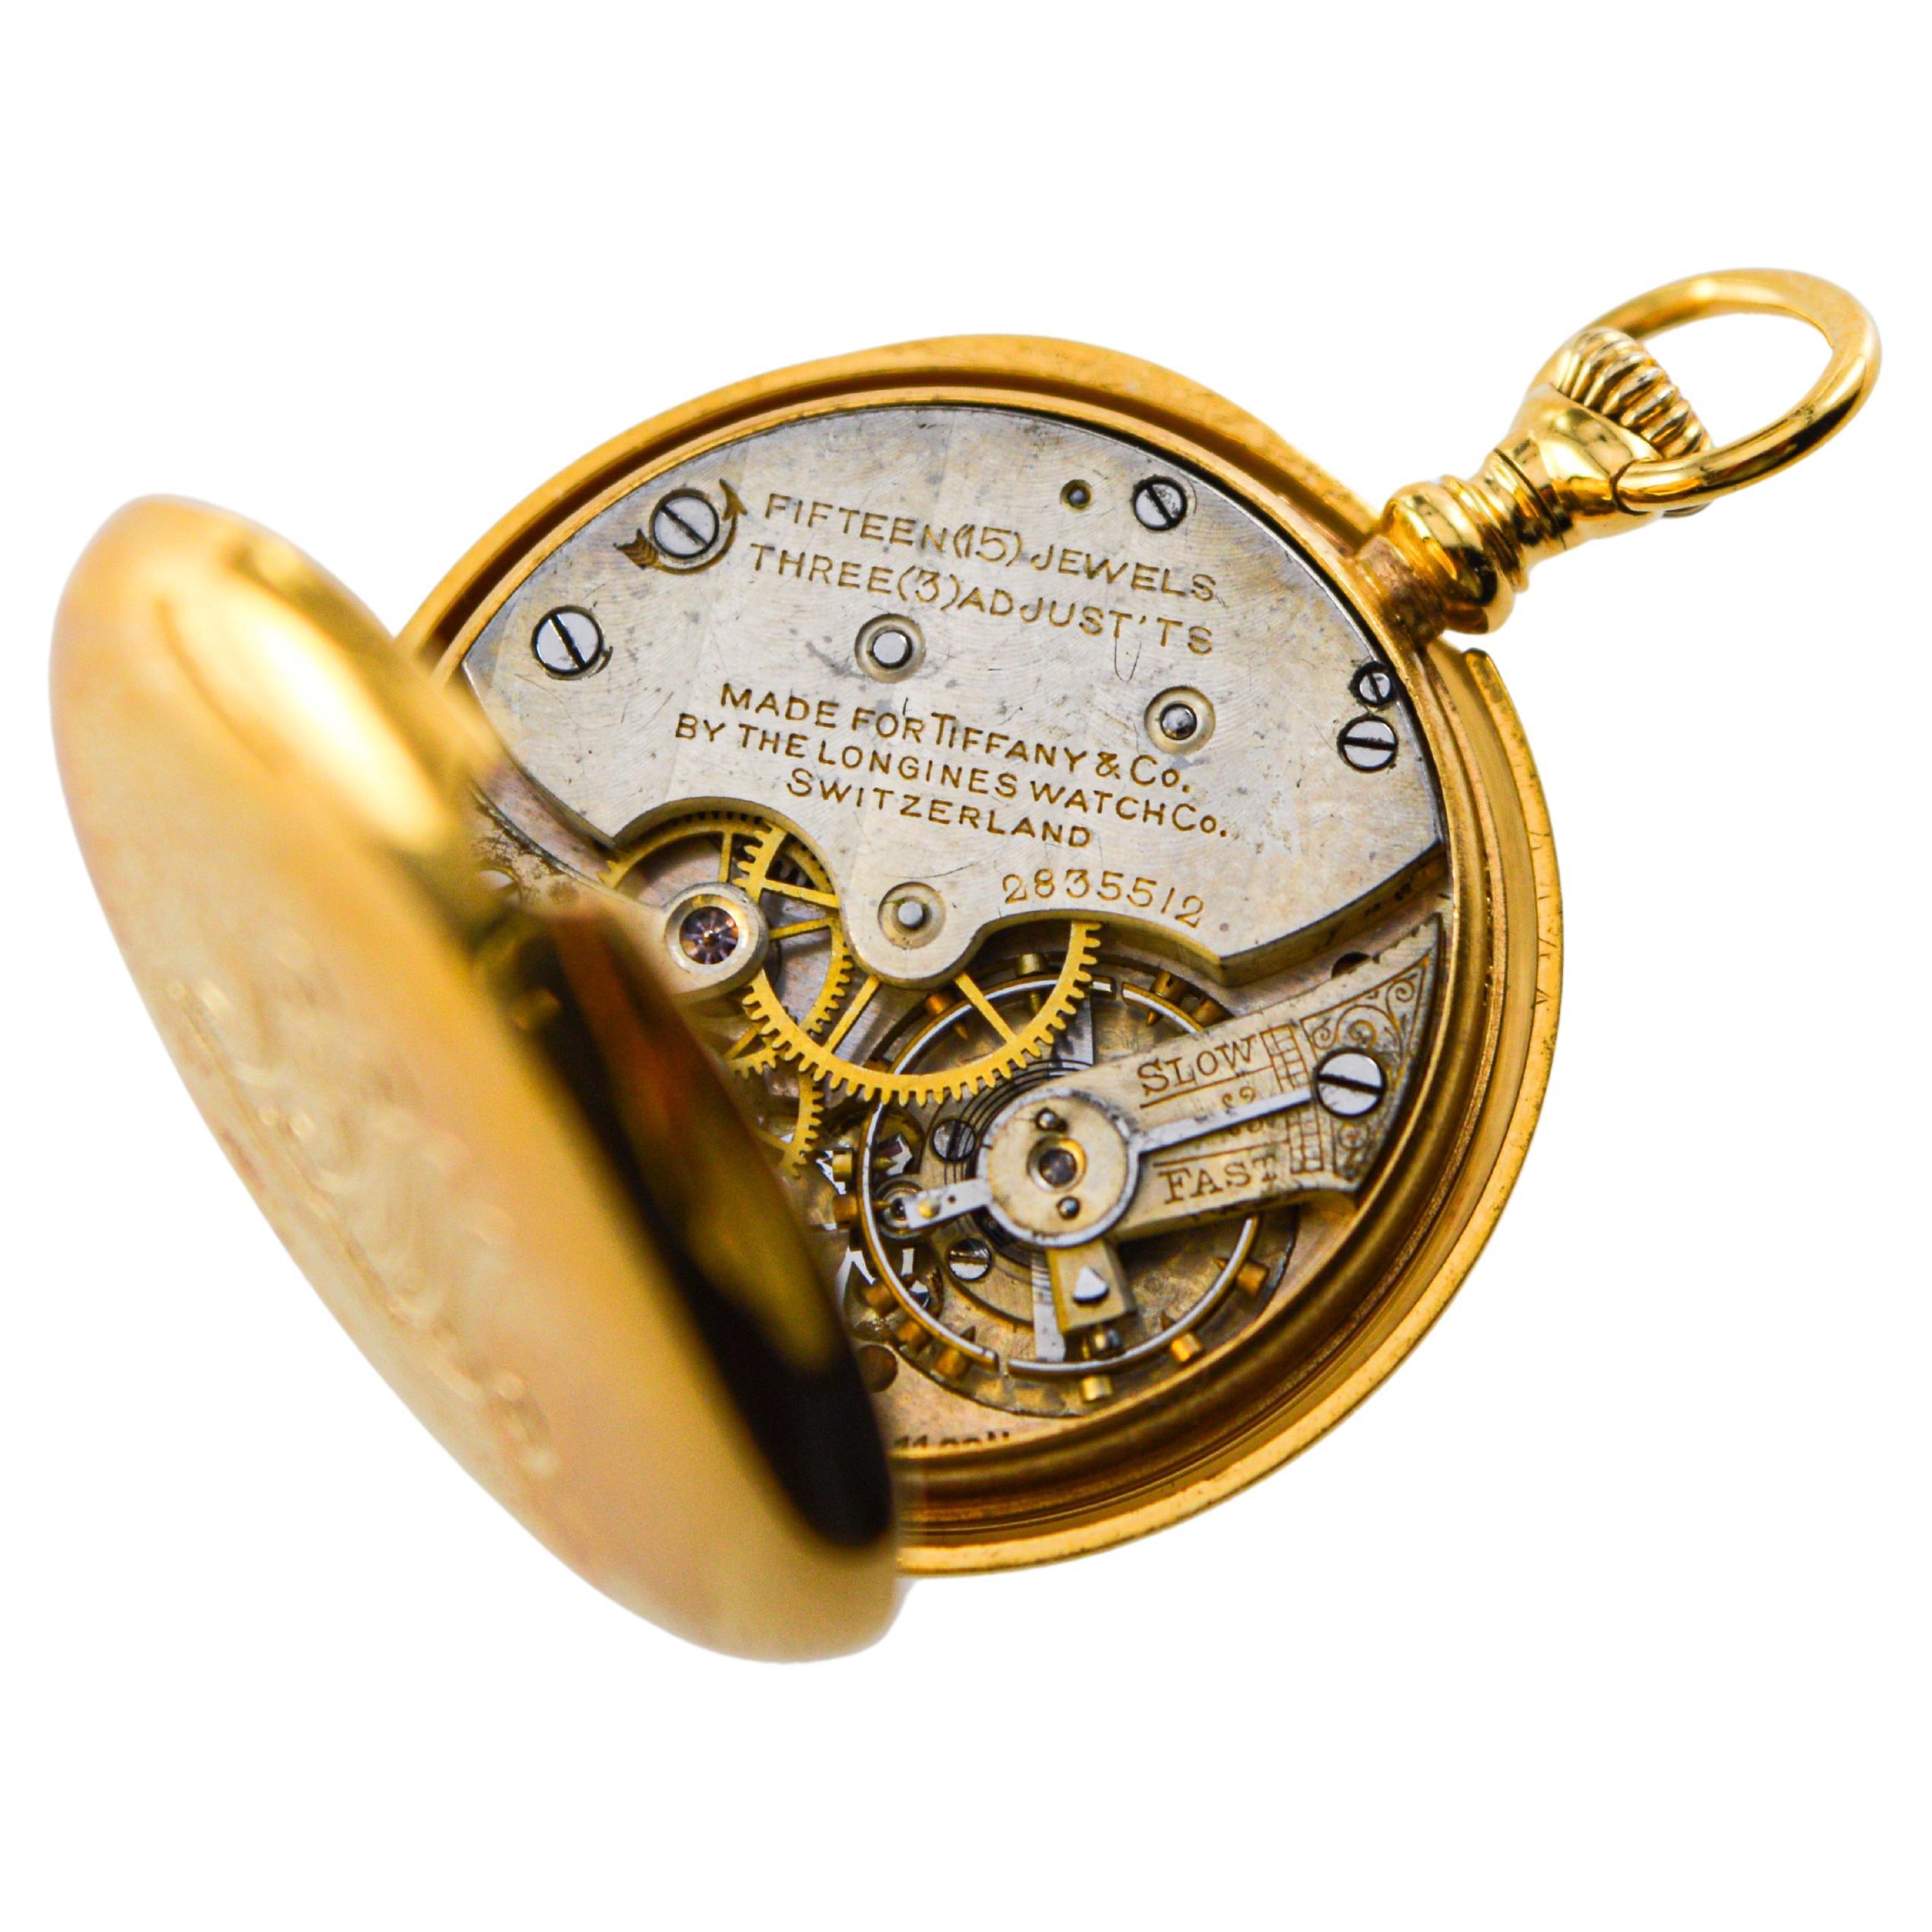 Tiffany & Co 18Kt Gold Pendant Watch with Gold Chain from 1912 Enamel Dial For Sale 5